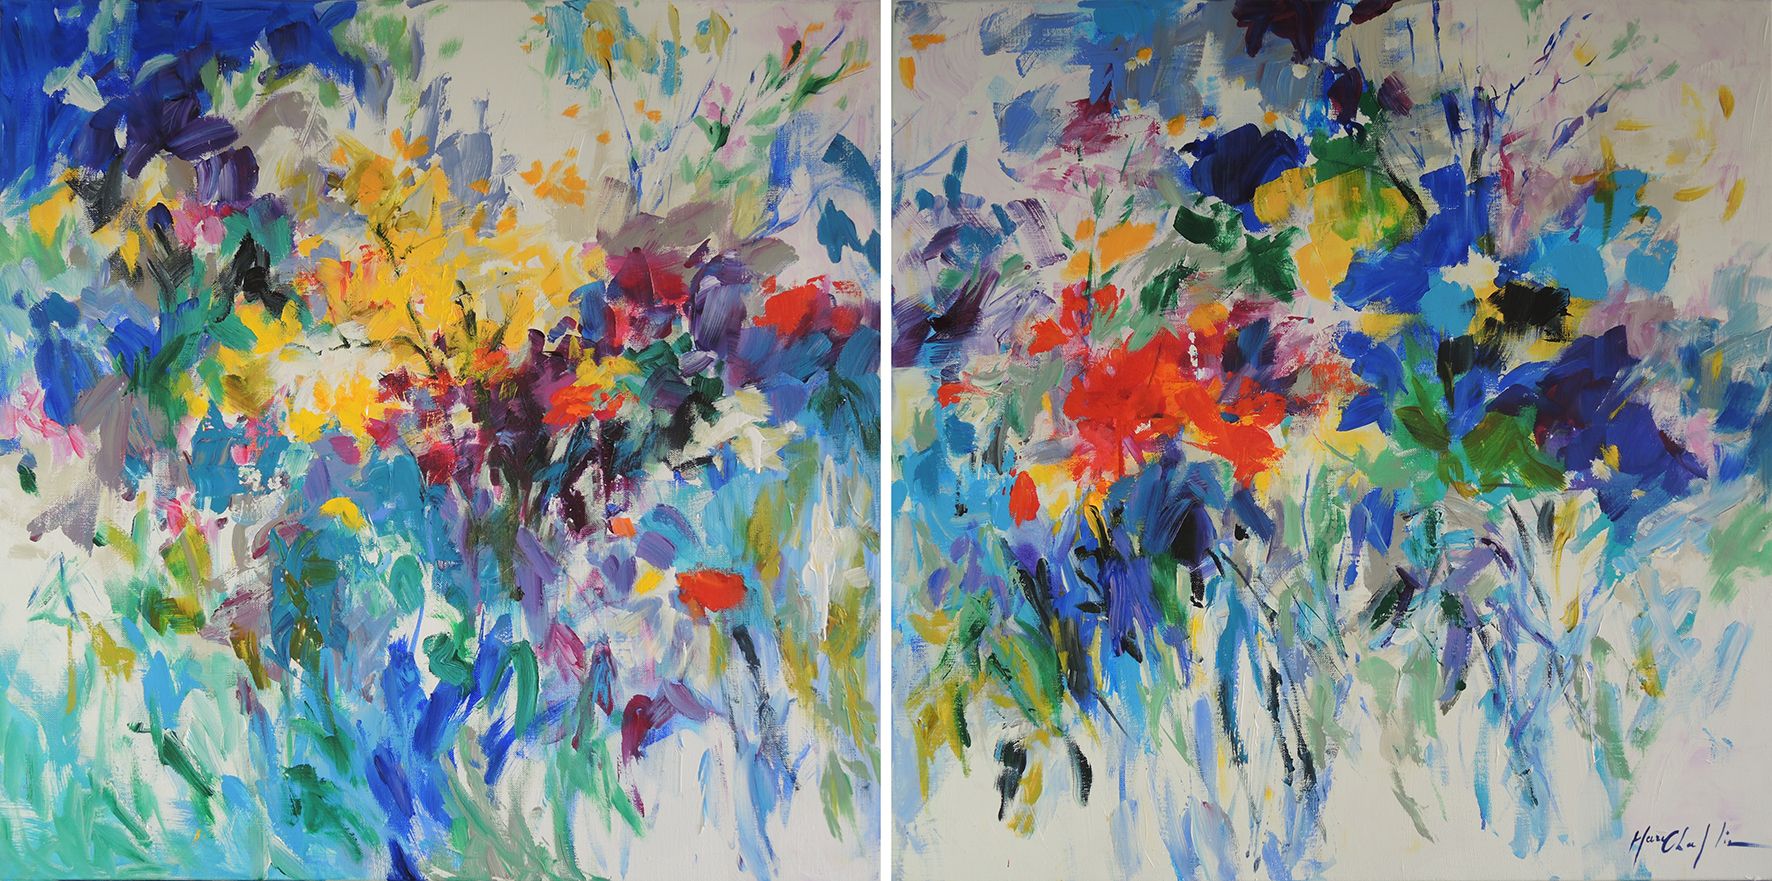 Summer feeling in blue, floral by Mary Chaplin